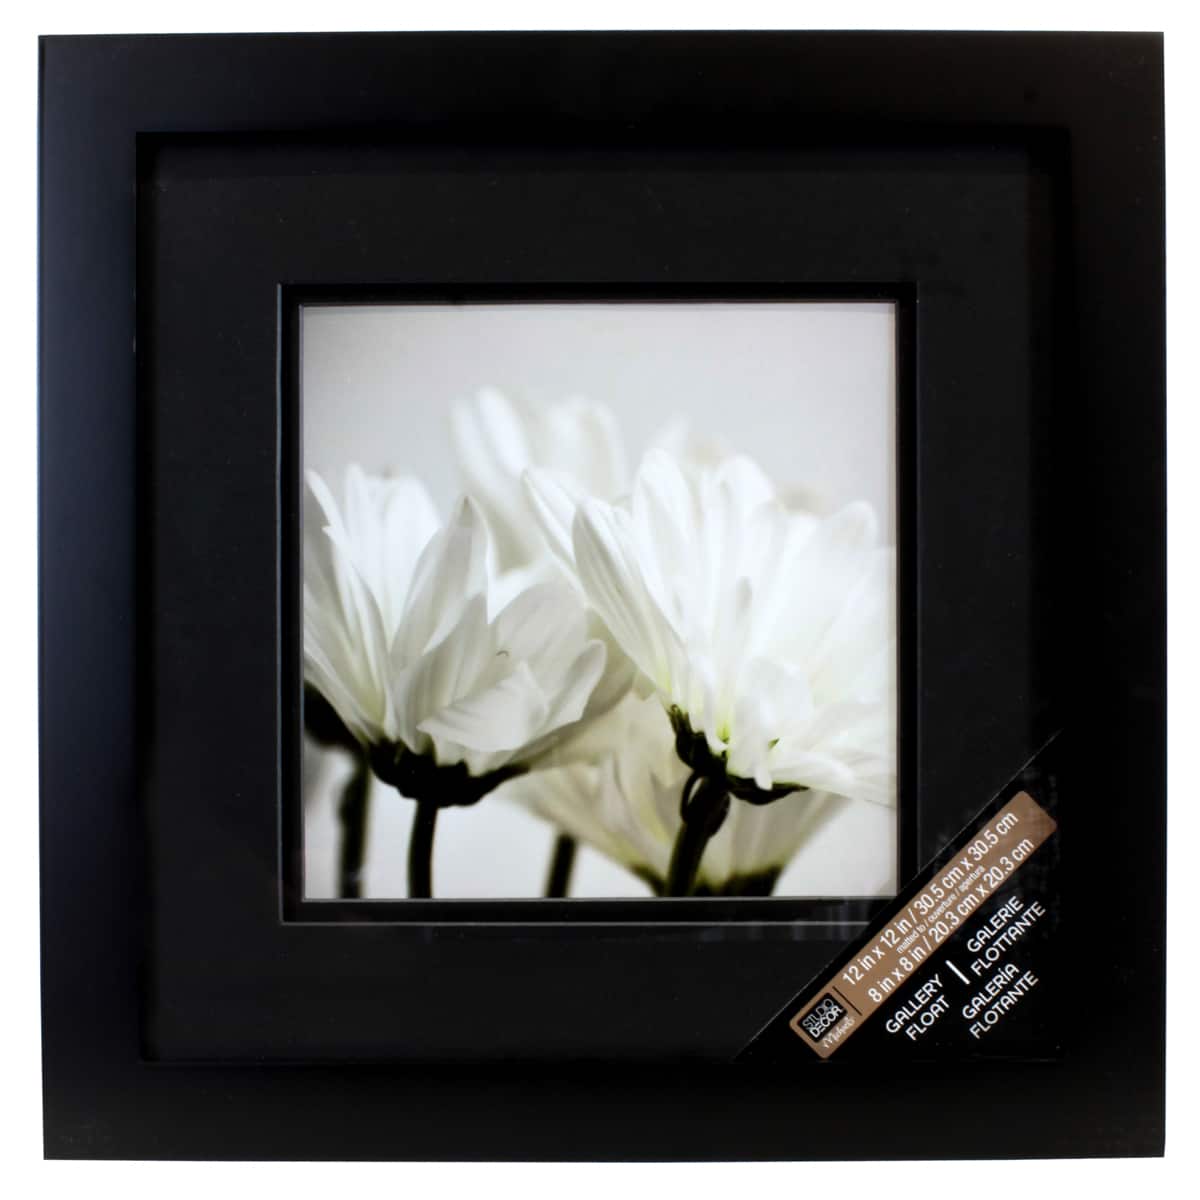 White Square Gallery Wall Frame with Double Mat by Studio Décor